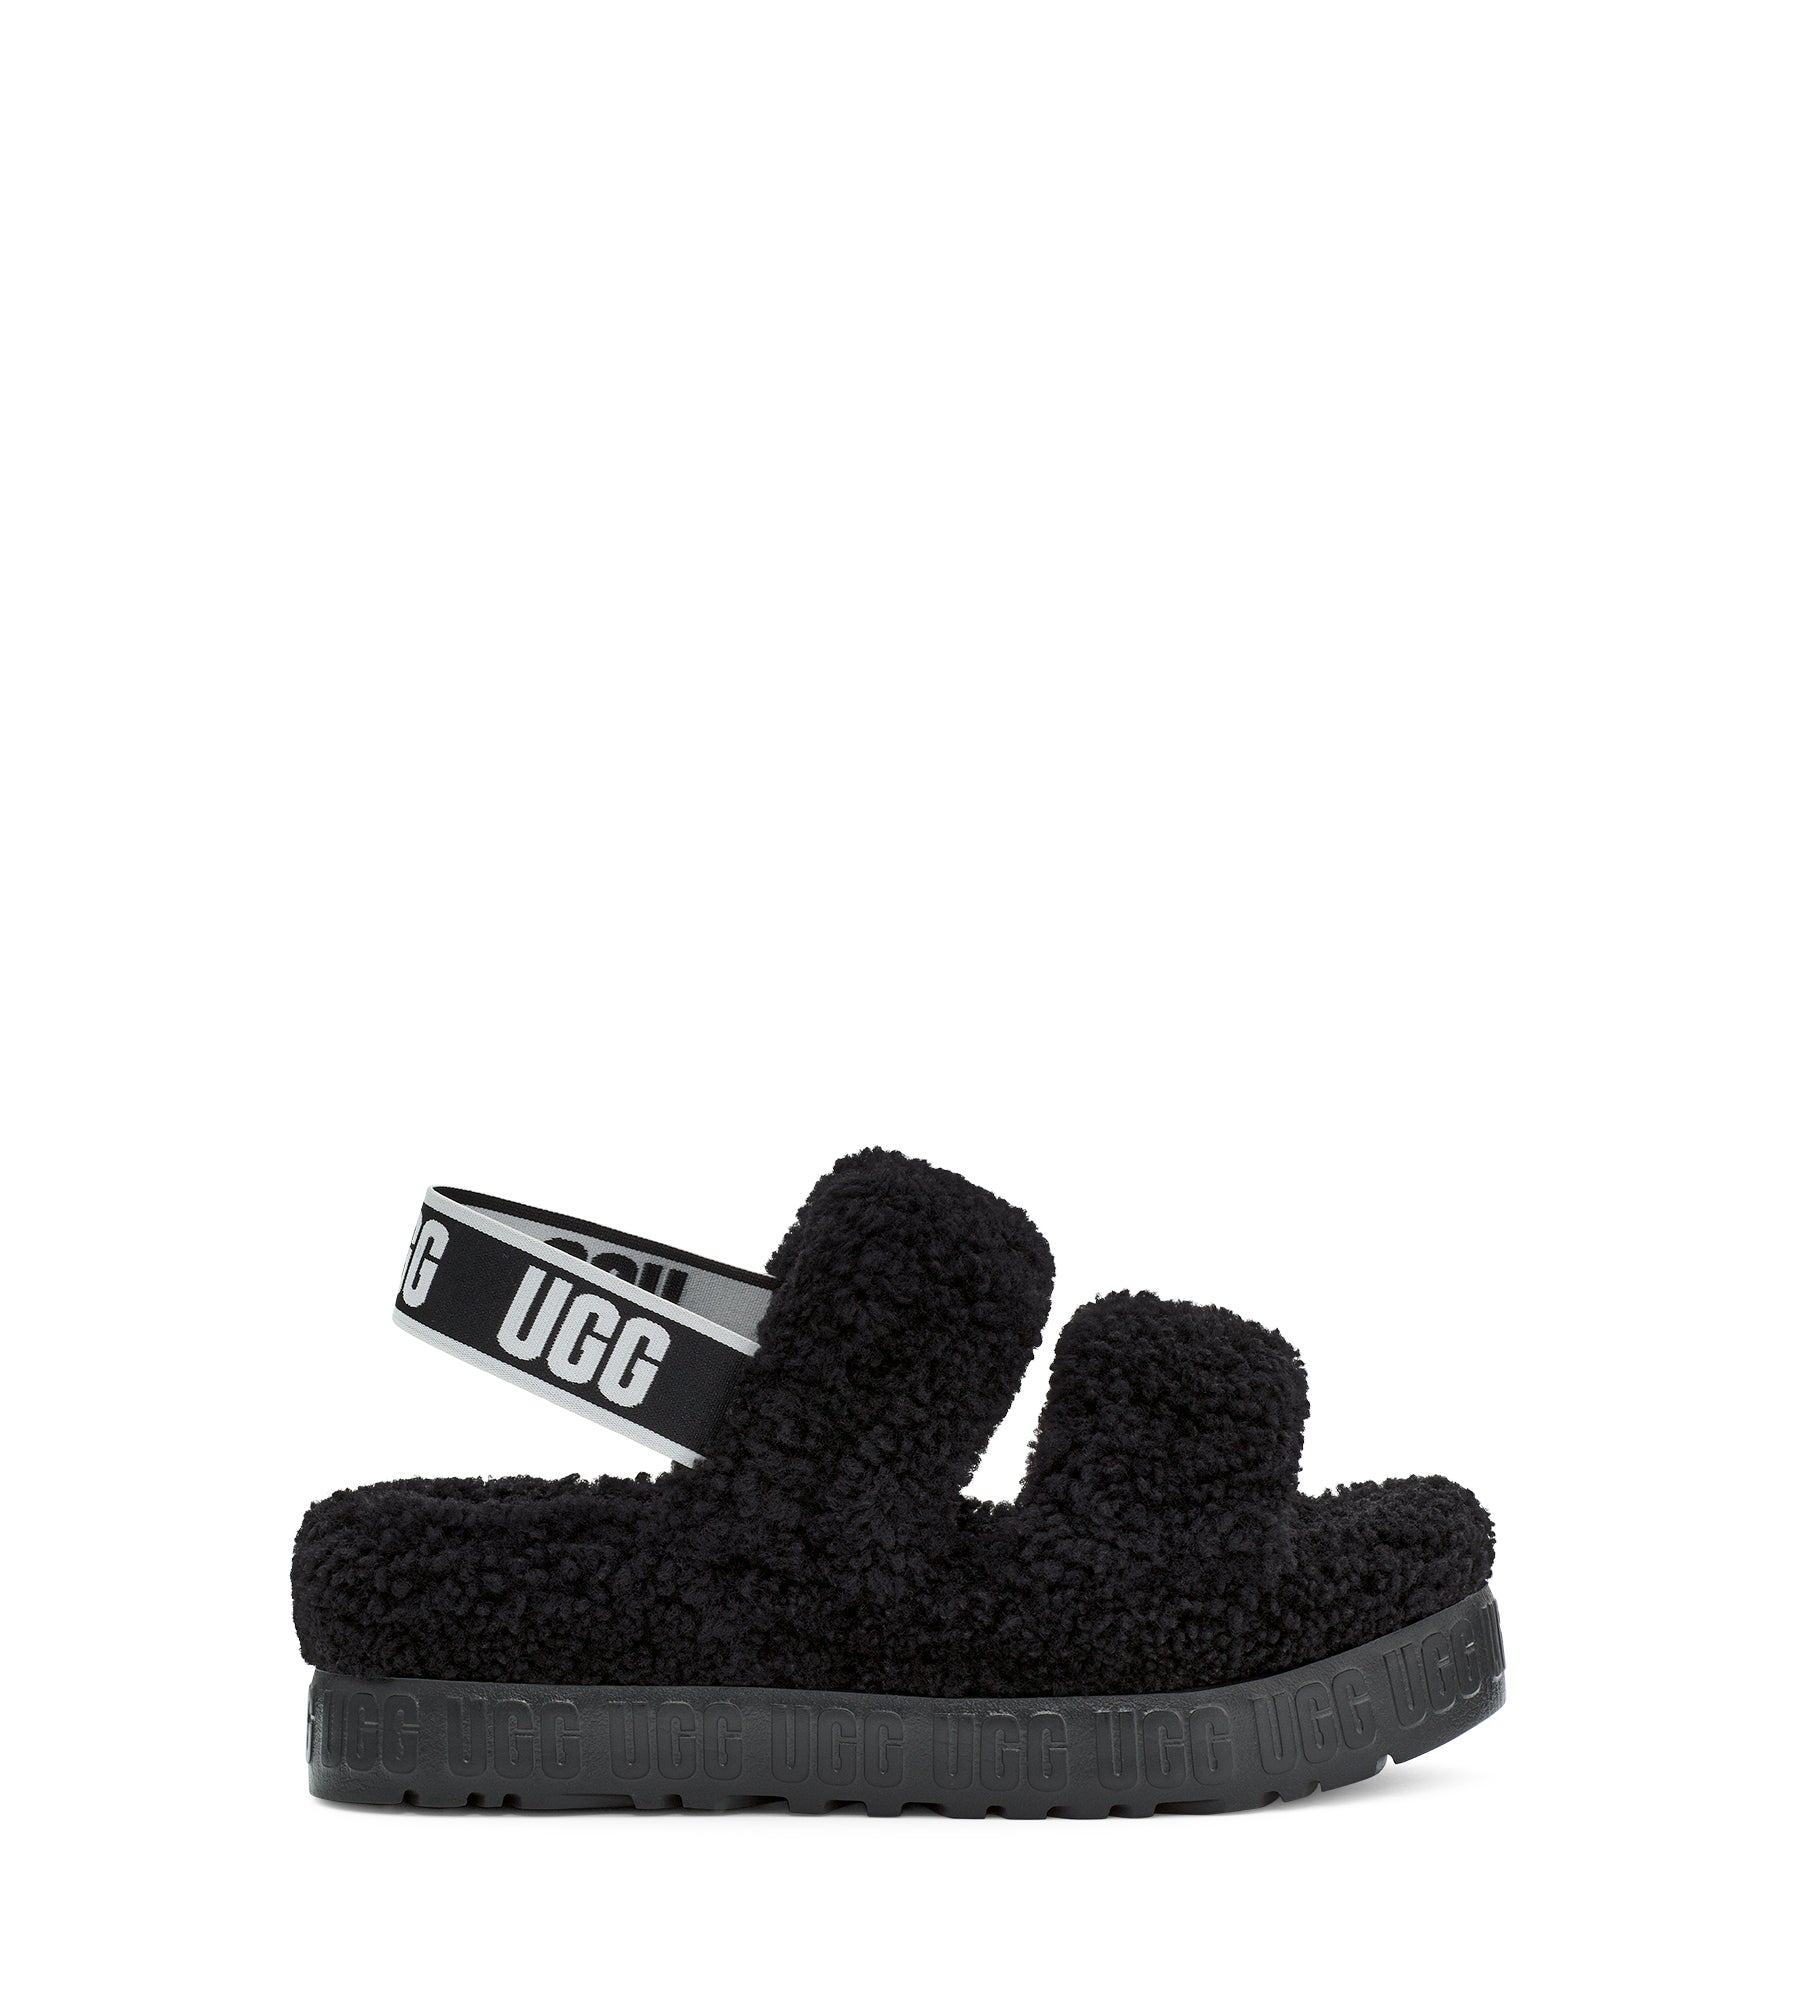 Ugg has merged the popular Oh Yeah and Fluffita, to get the Oh Fluffita.  This style offers the best of both worlds with its strappy silhouette, curly sheepskin, and cushioned platform sole. Featuring a contoured footbed for a custom feel, it's lined with curly sheepskin and punctuated with graphic logo detailing, adding a bold statement to any look.